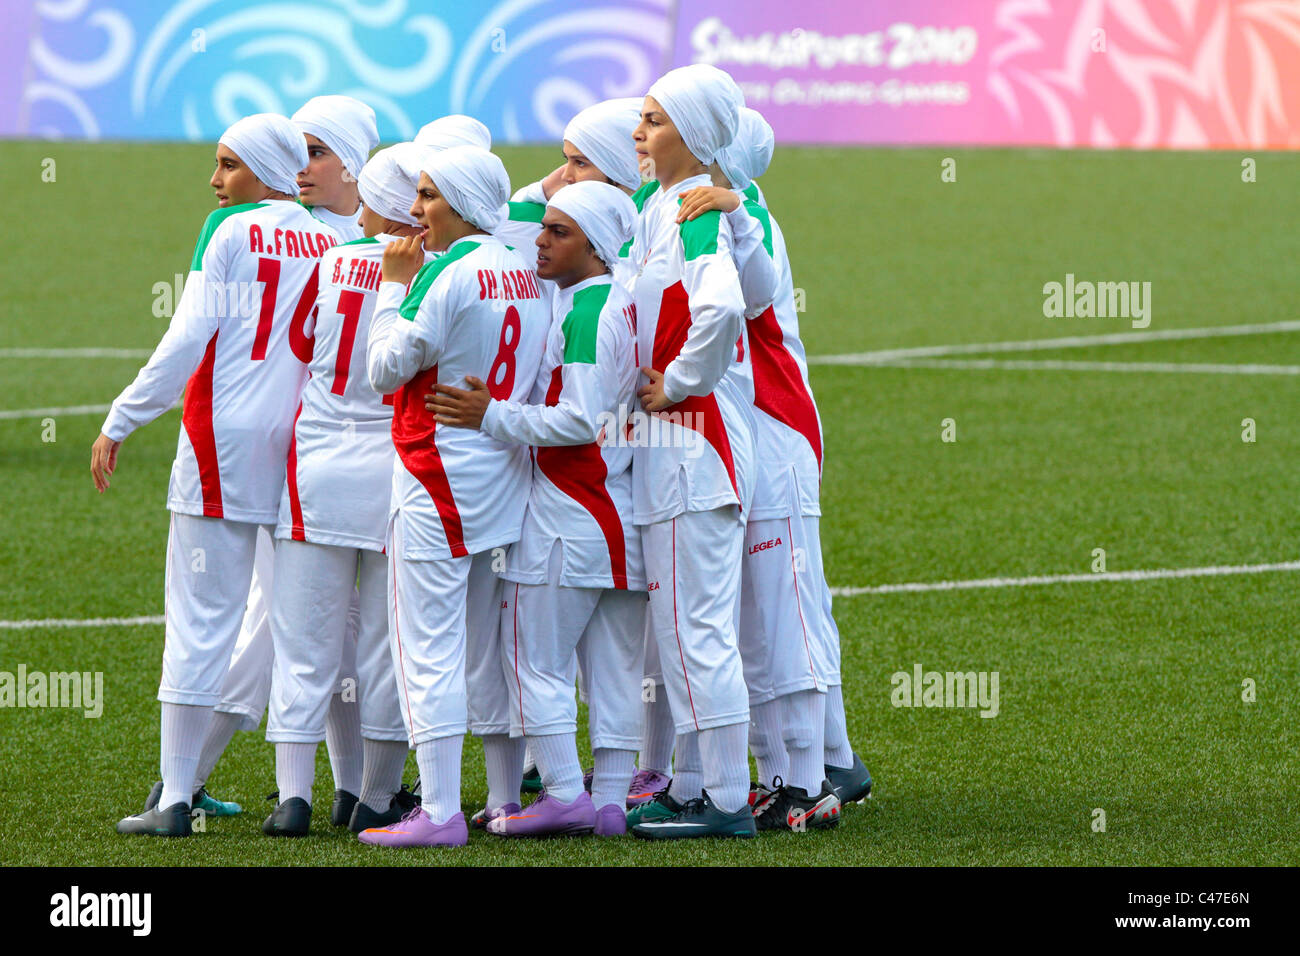 The Iranian team huddle together before the start of their match. Stock Photo